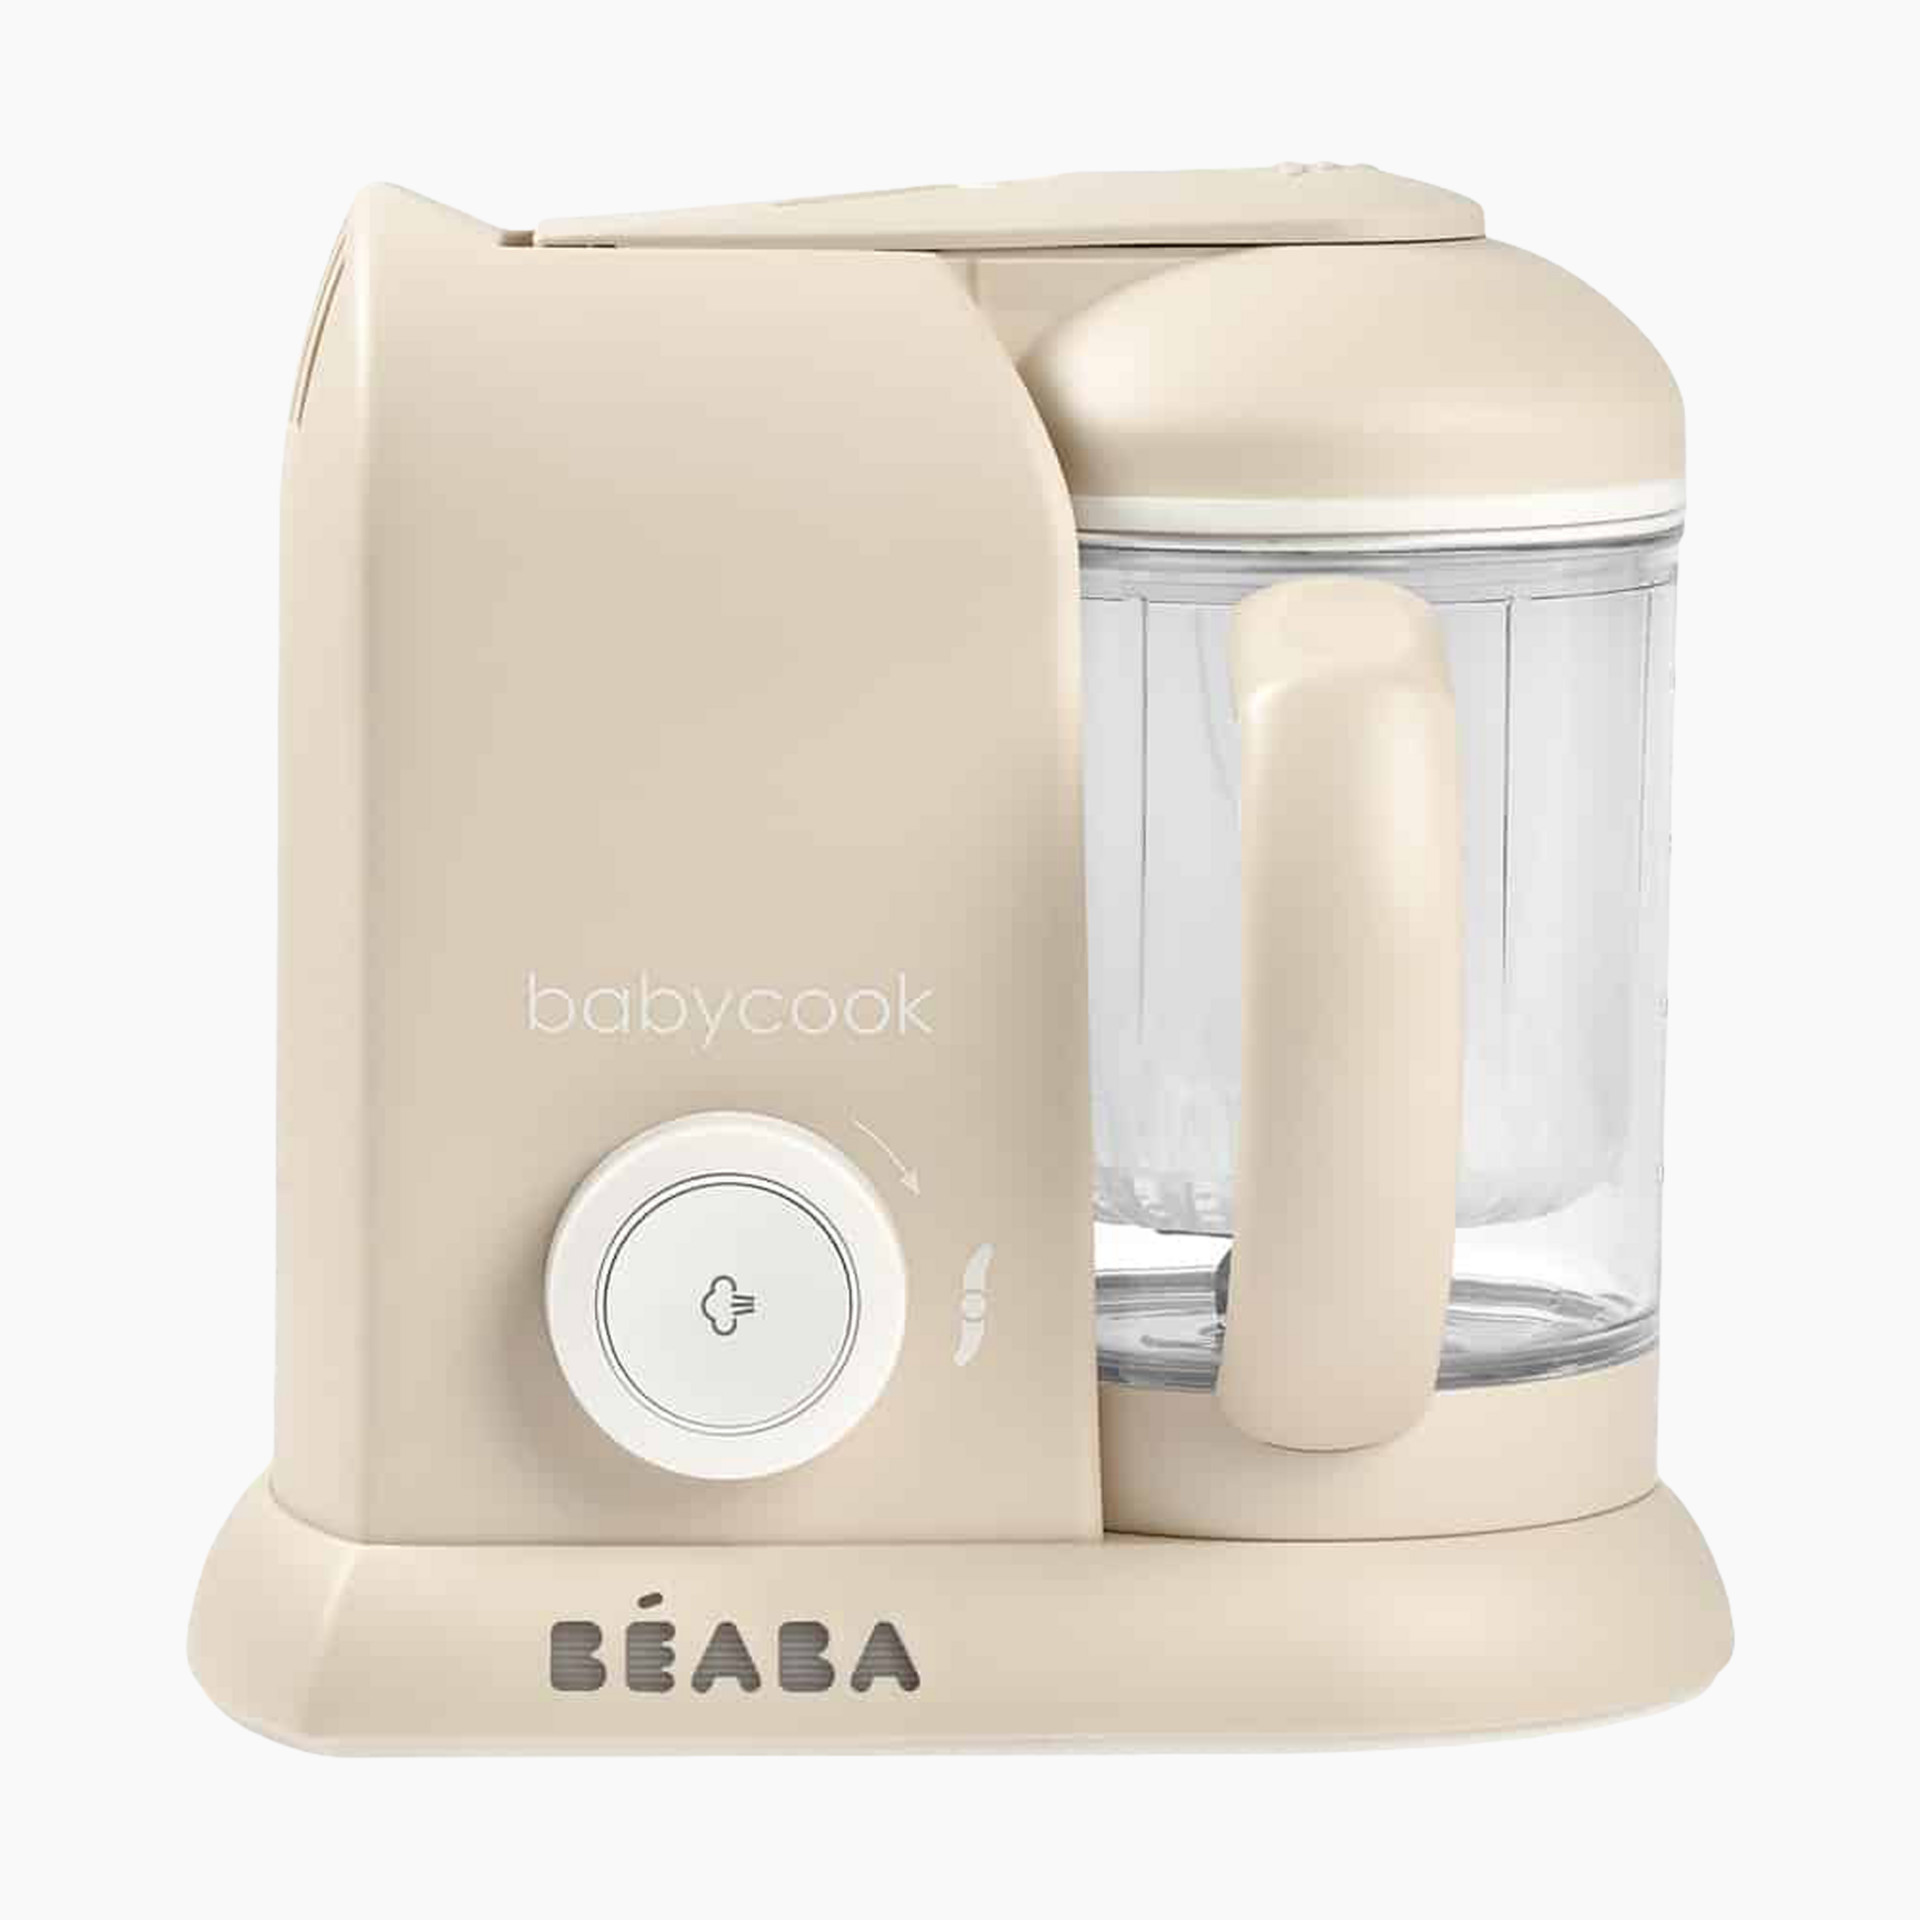 BEABA Babycook Duo 4 in 1 Baby Food Maker, Baby Food Processor, Steam Cook  and